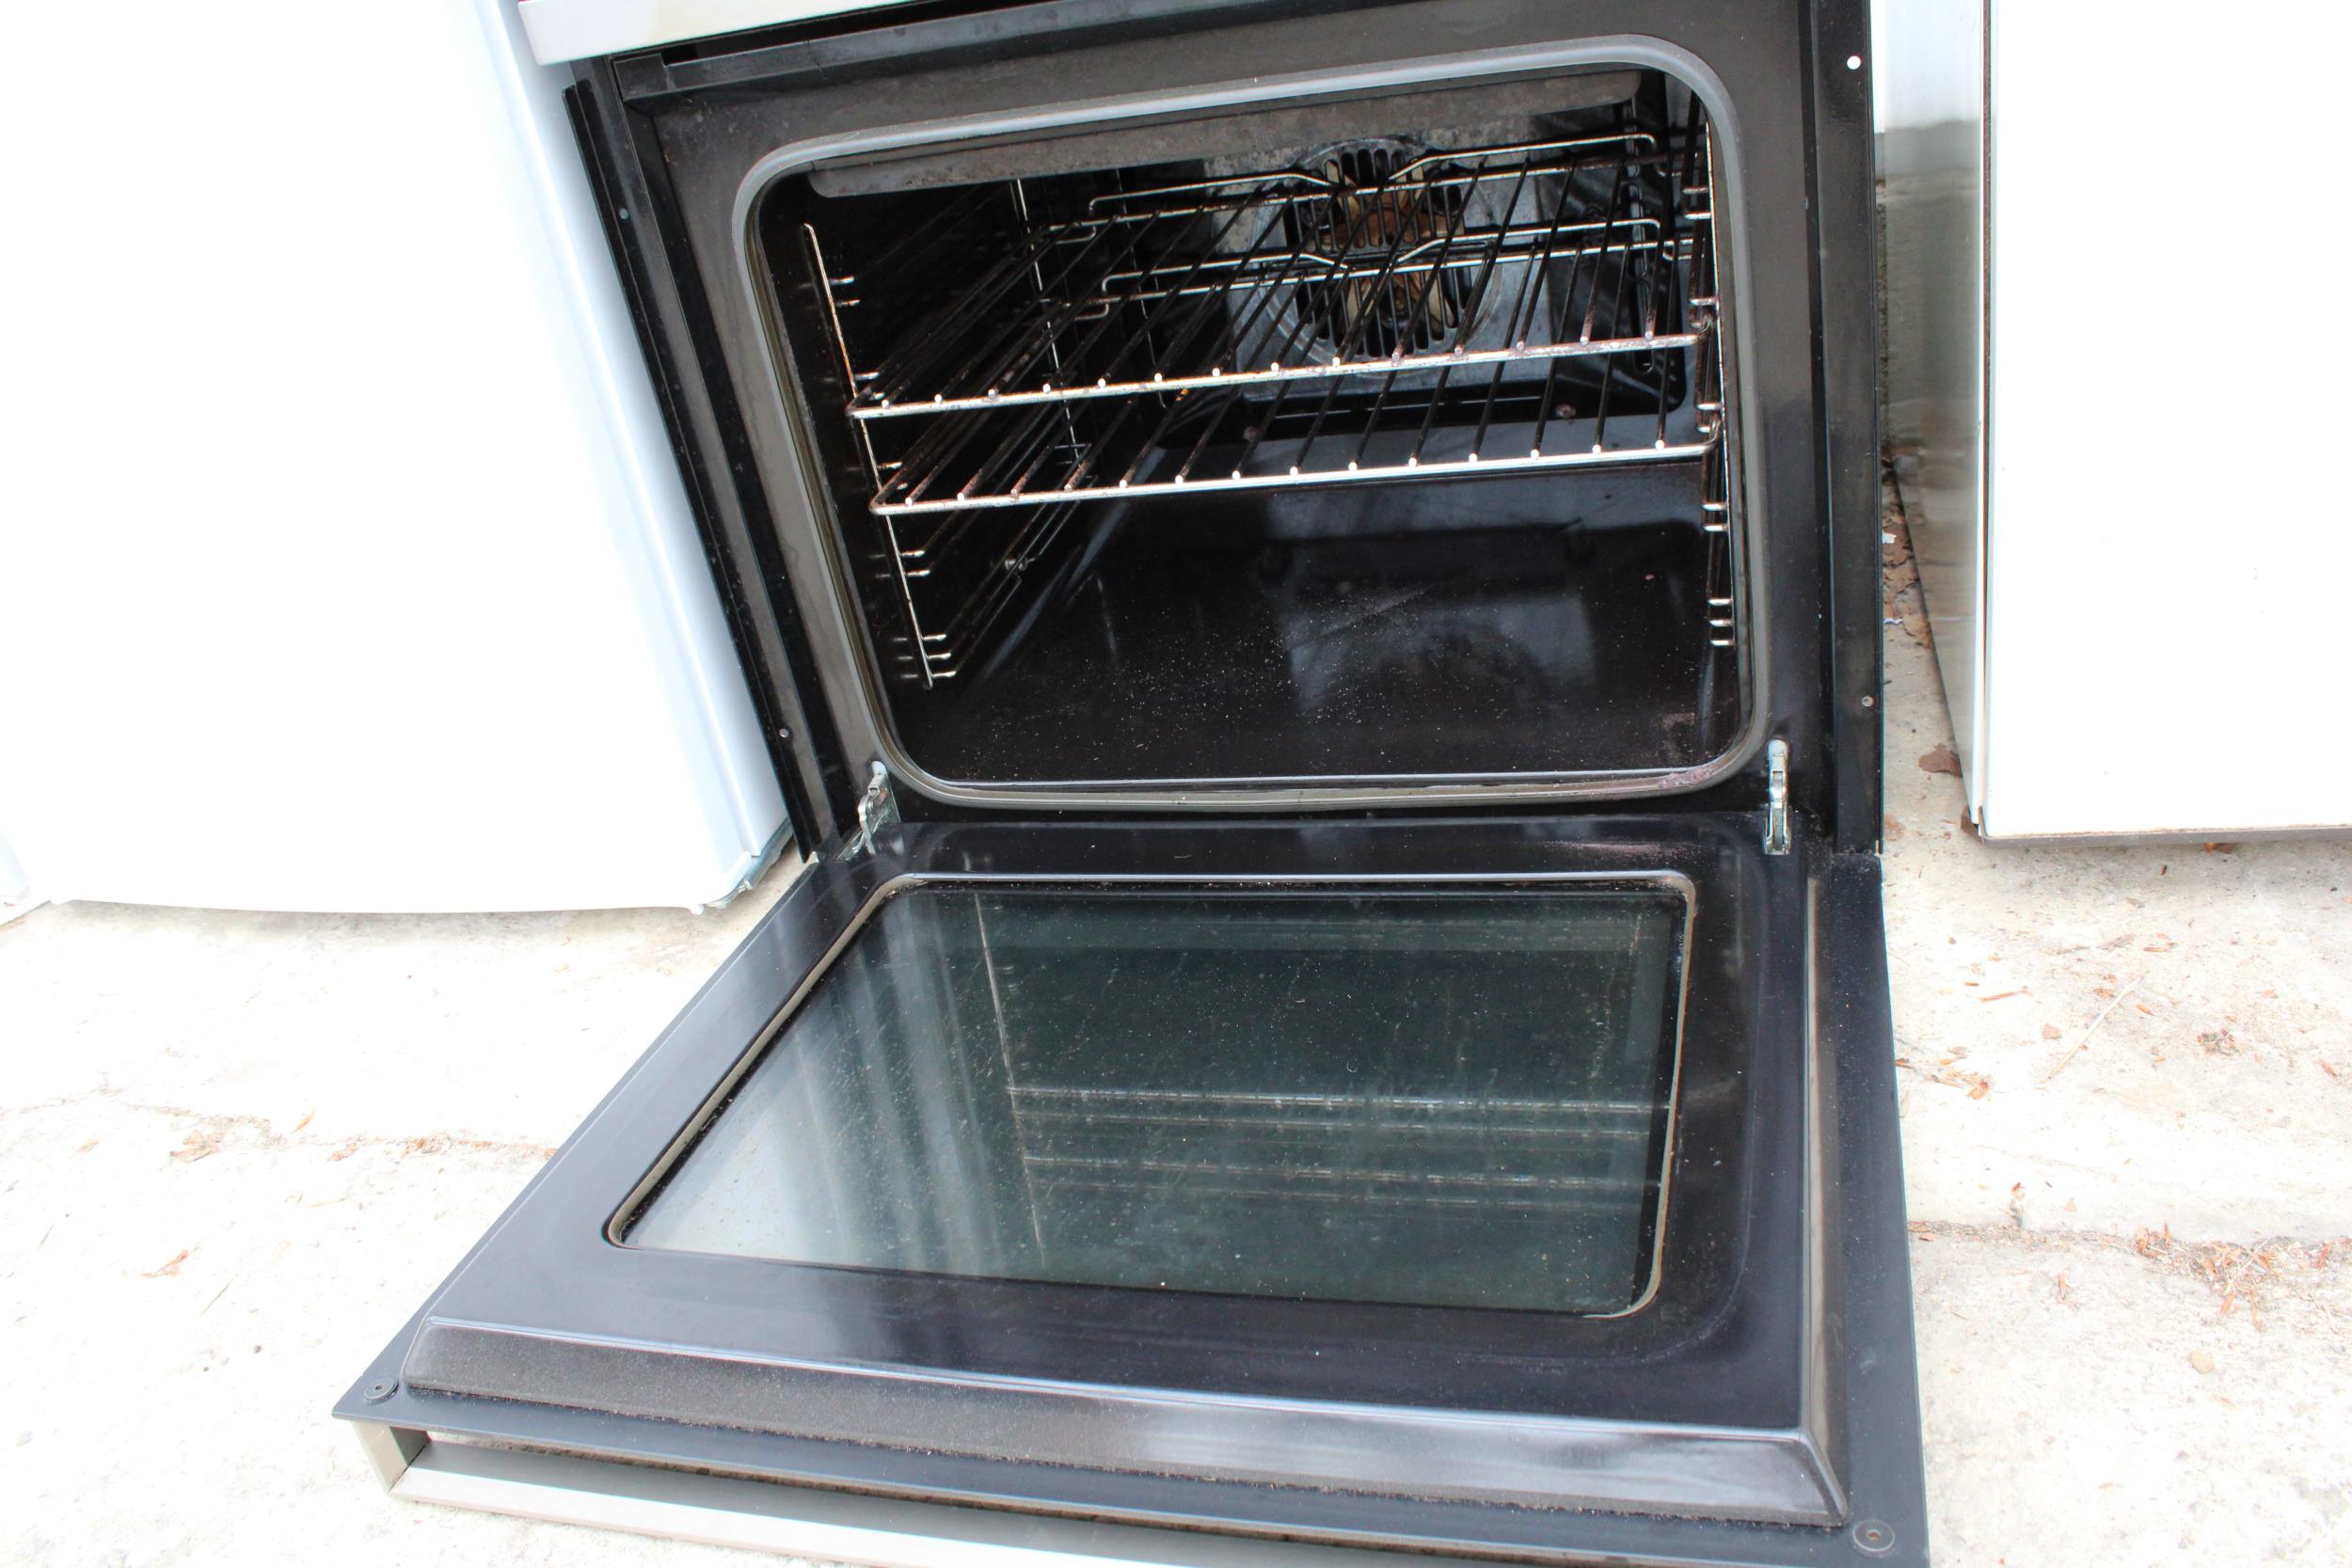 A CHROME AND BLACK BAUMATIC INTERGRATED DOUBLE OVEN - Image 2 of 3